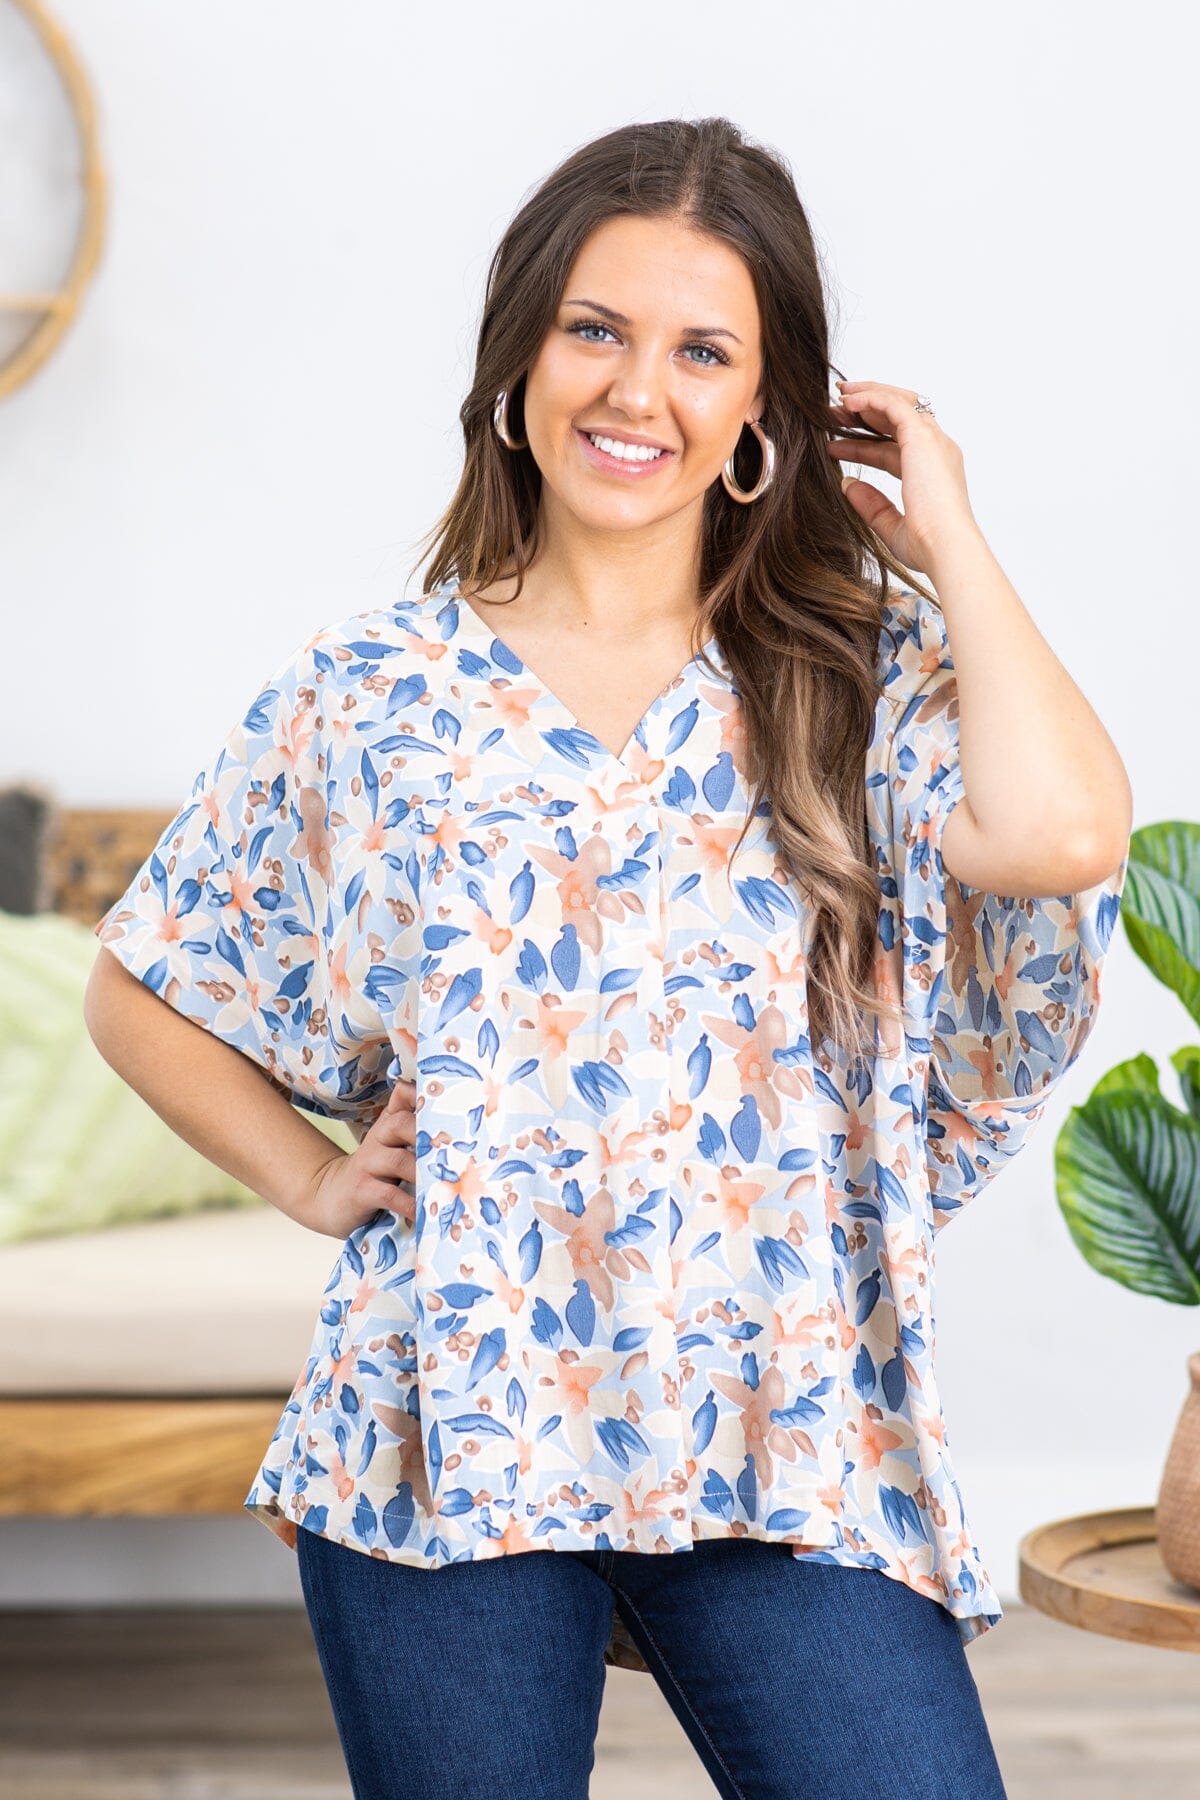 Slate Blue and Peach Floral Print Top - Filly Flair